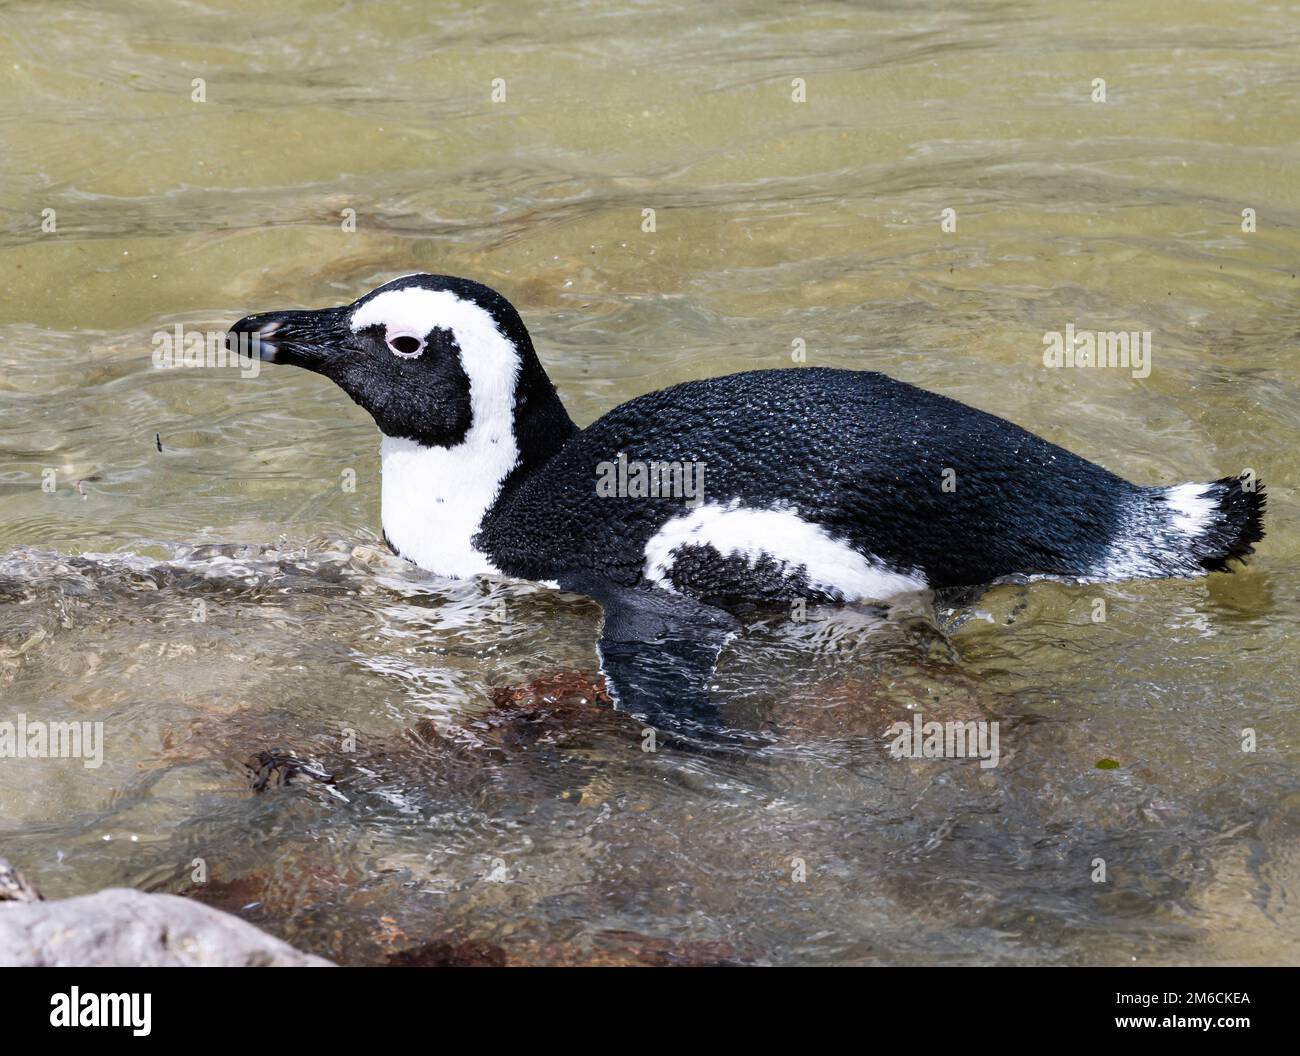 An endangered African Penguin (Spheniscus demersus) swimming in the water. Western Cape, South Africa. Stock Photo